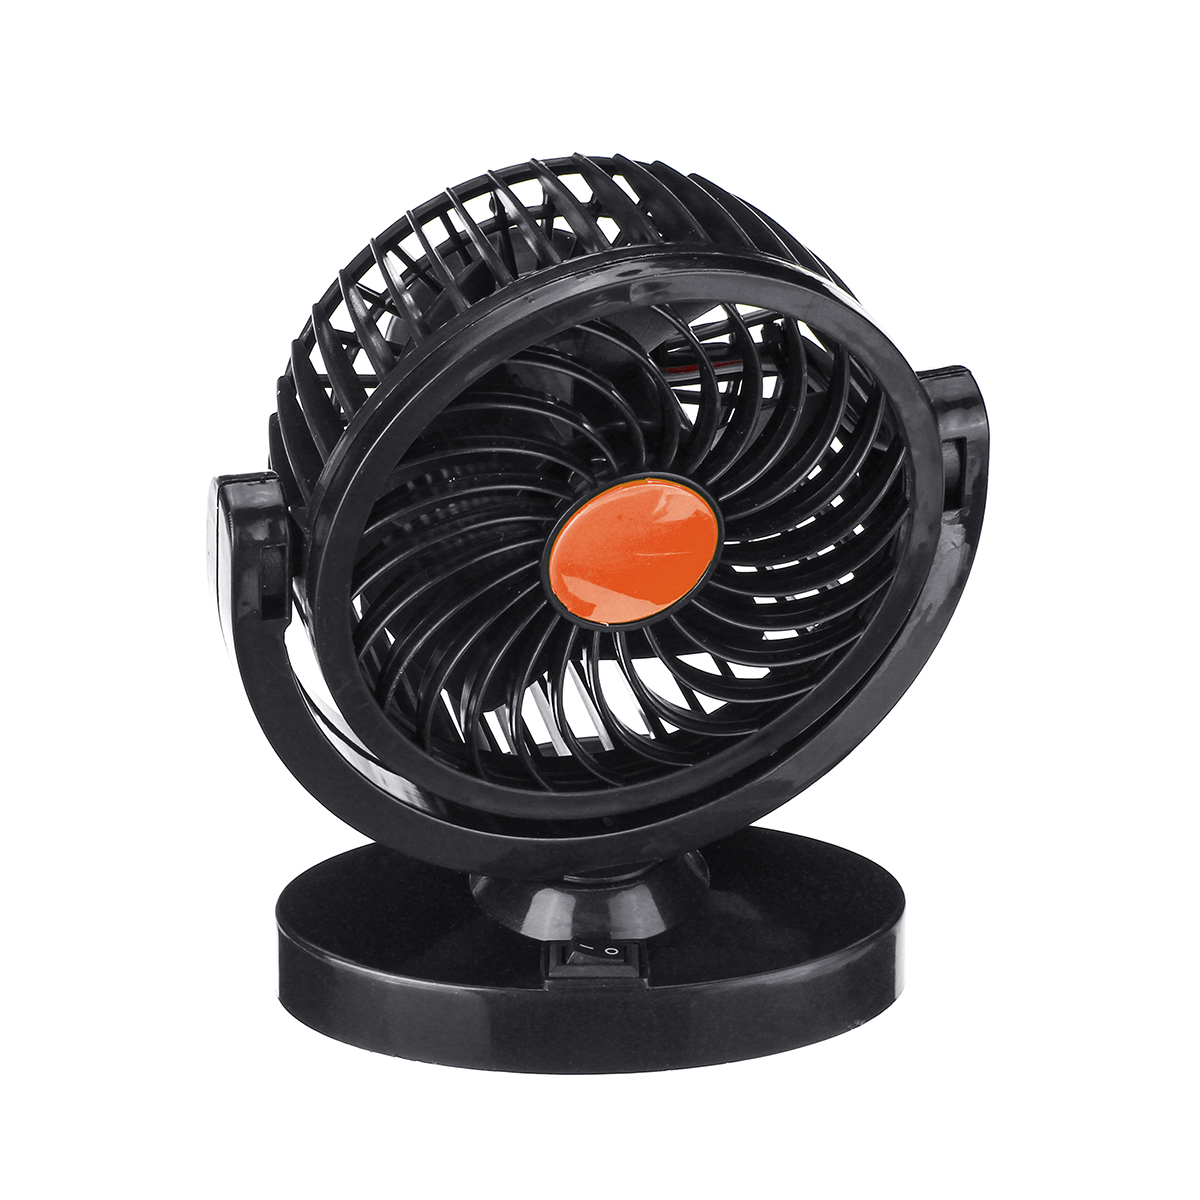 DC-12V24V-360deg-All-Round-Mini-Auto-Air-Cooling-Fan-Adjustable-Low-Noise-1466573-8